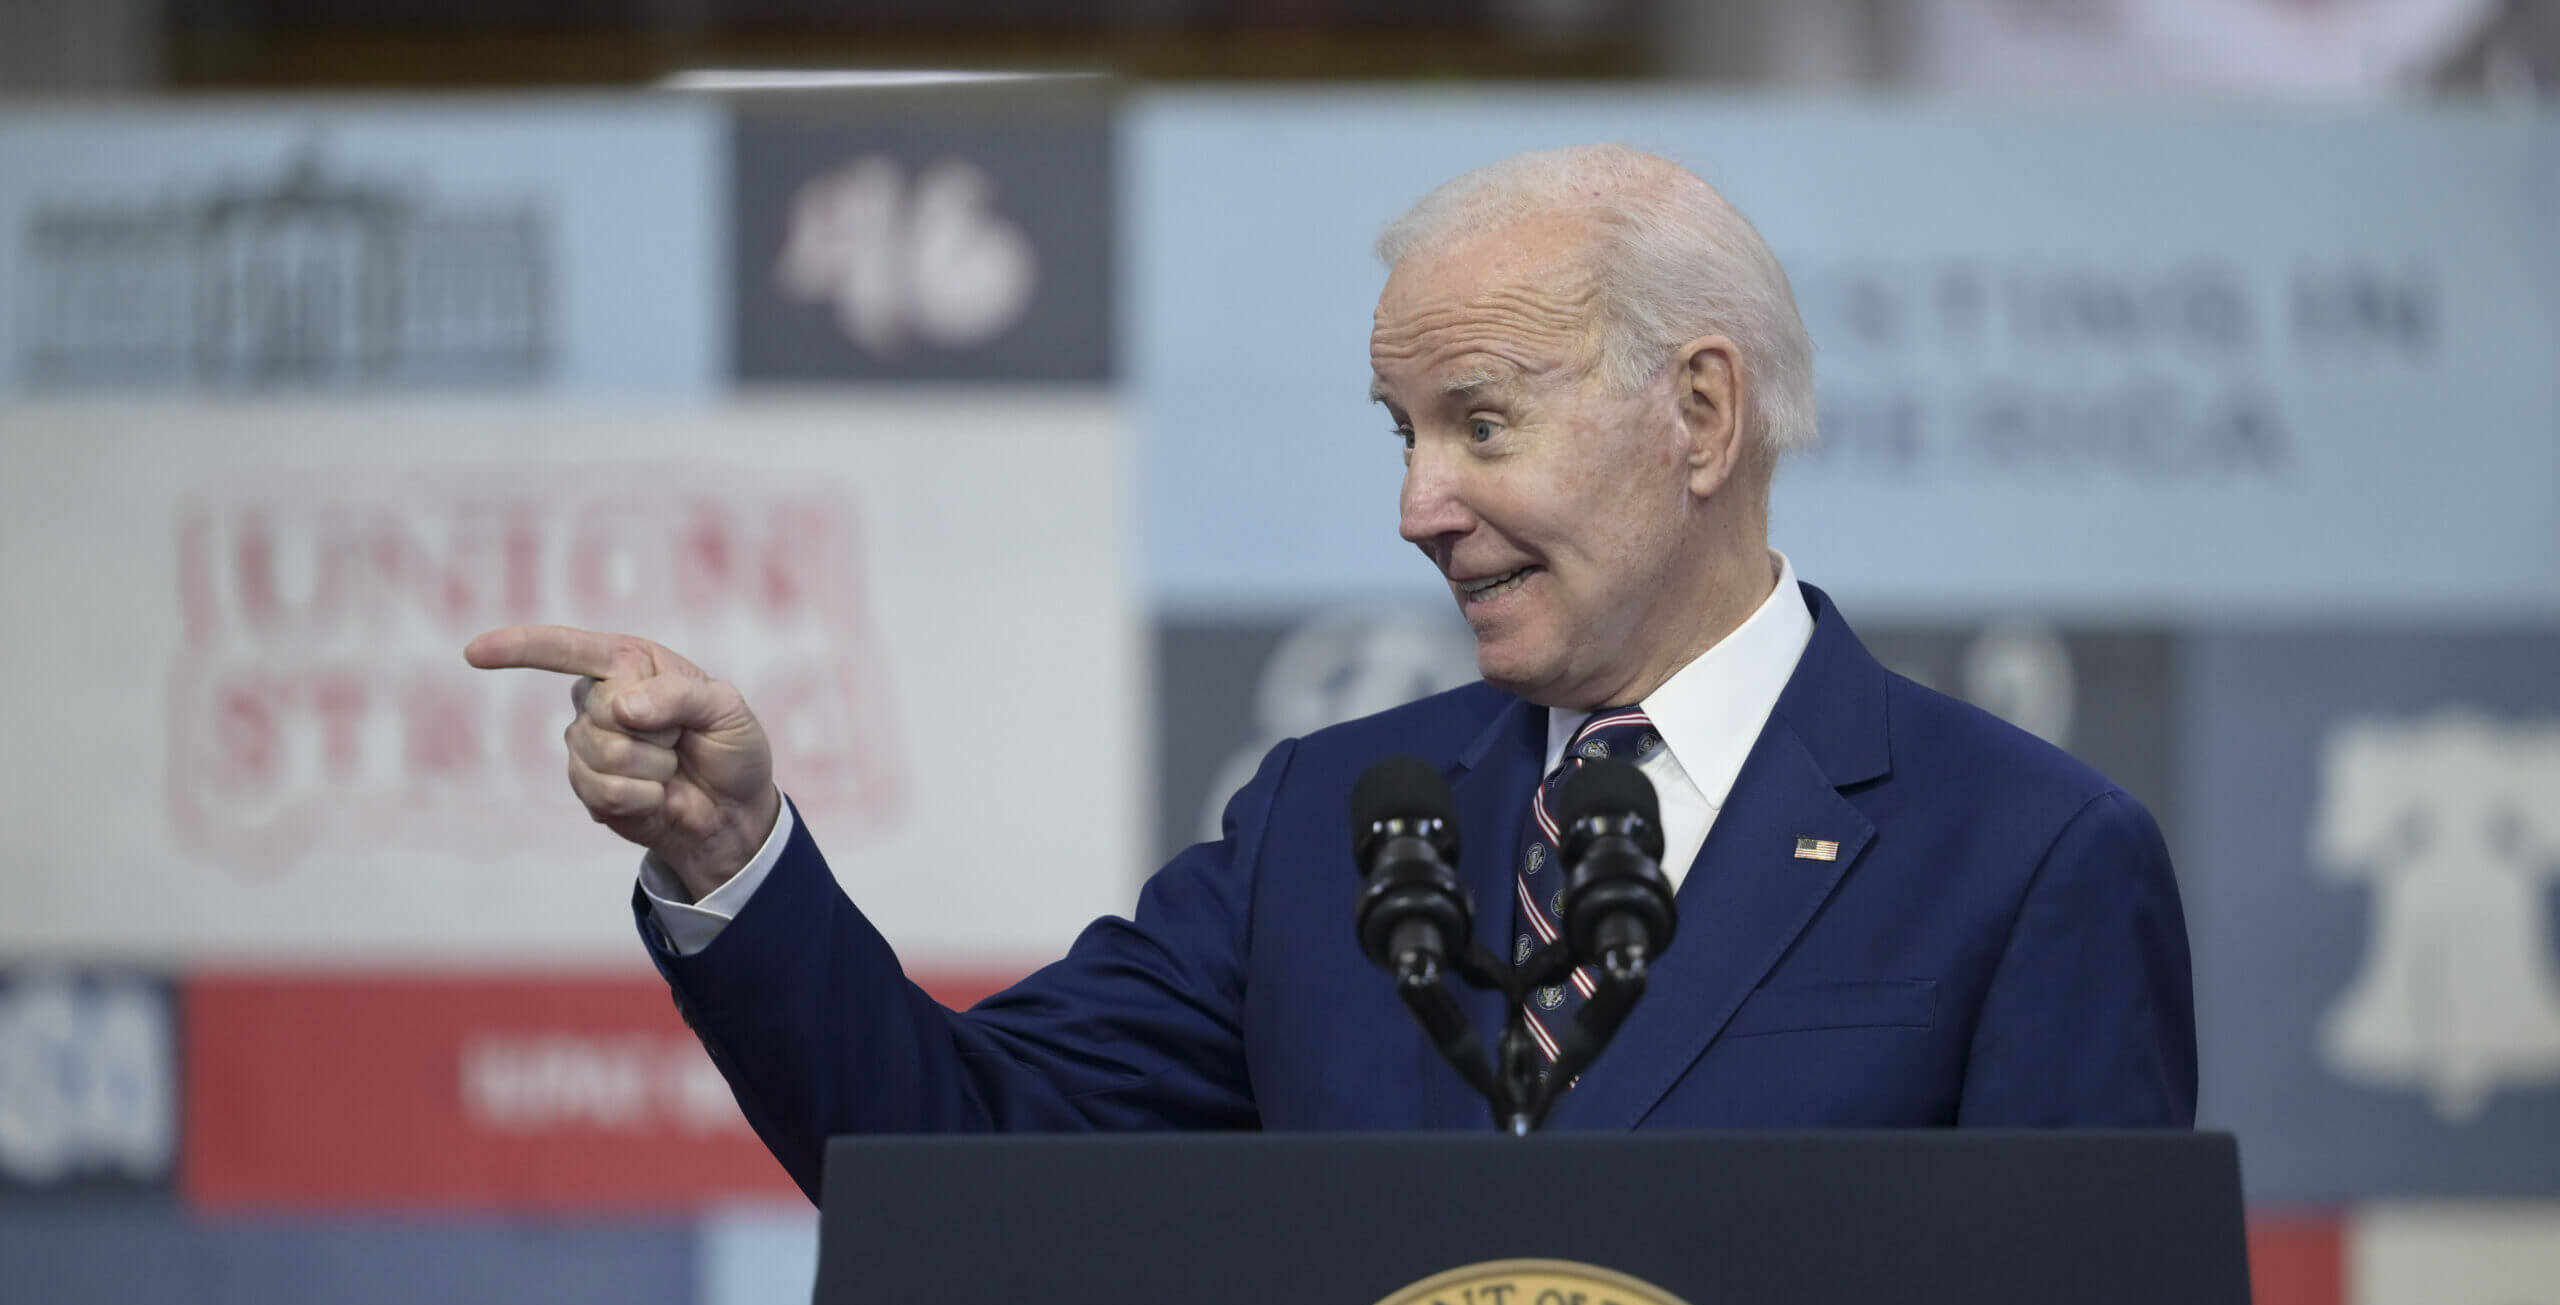 Morning Greatness: Biden’s Budget Takes Aim at Fossil Fuel Industry With Tax Hikes › American Greatness